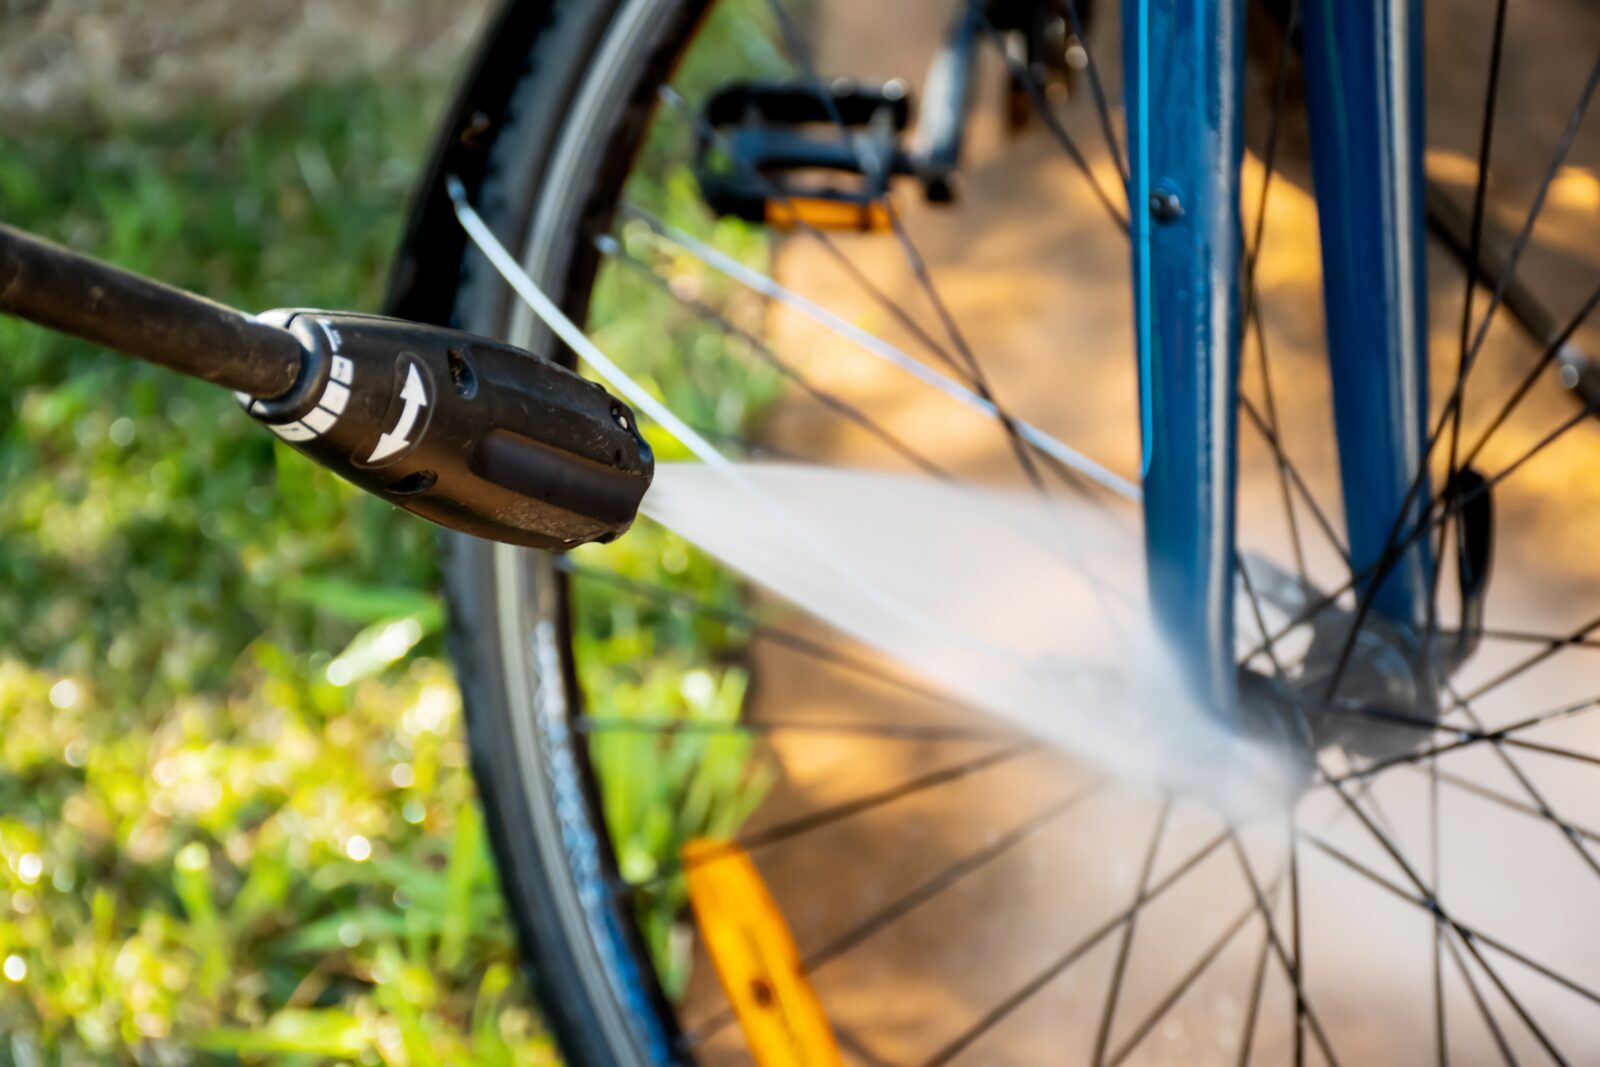 How did you wash your e-bike during the winter?